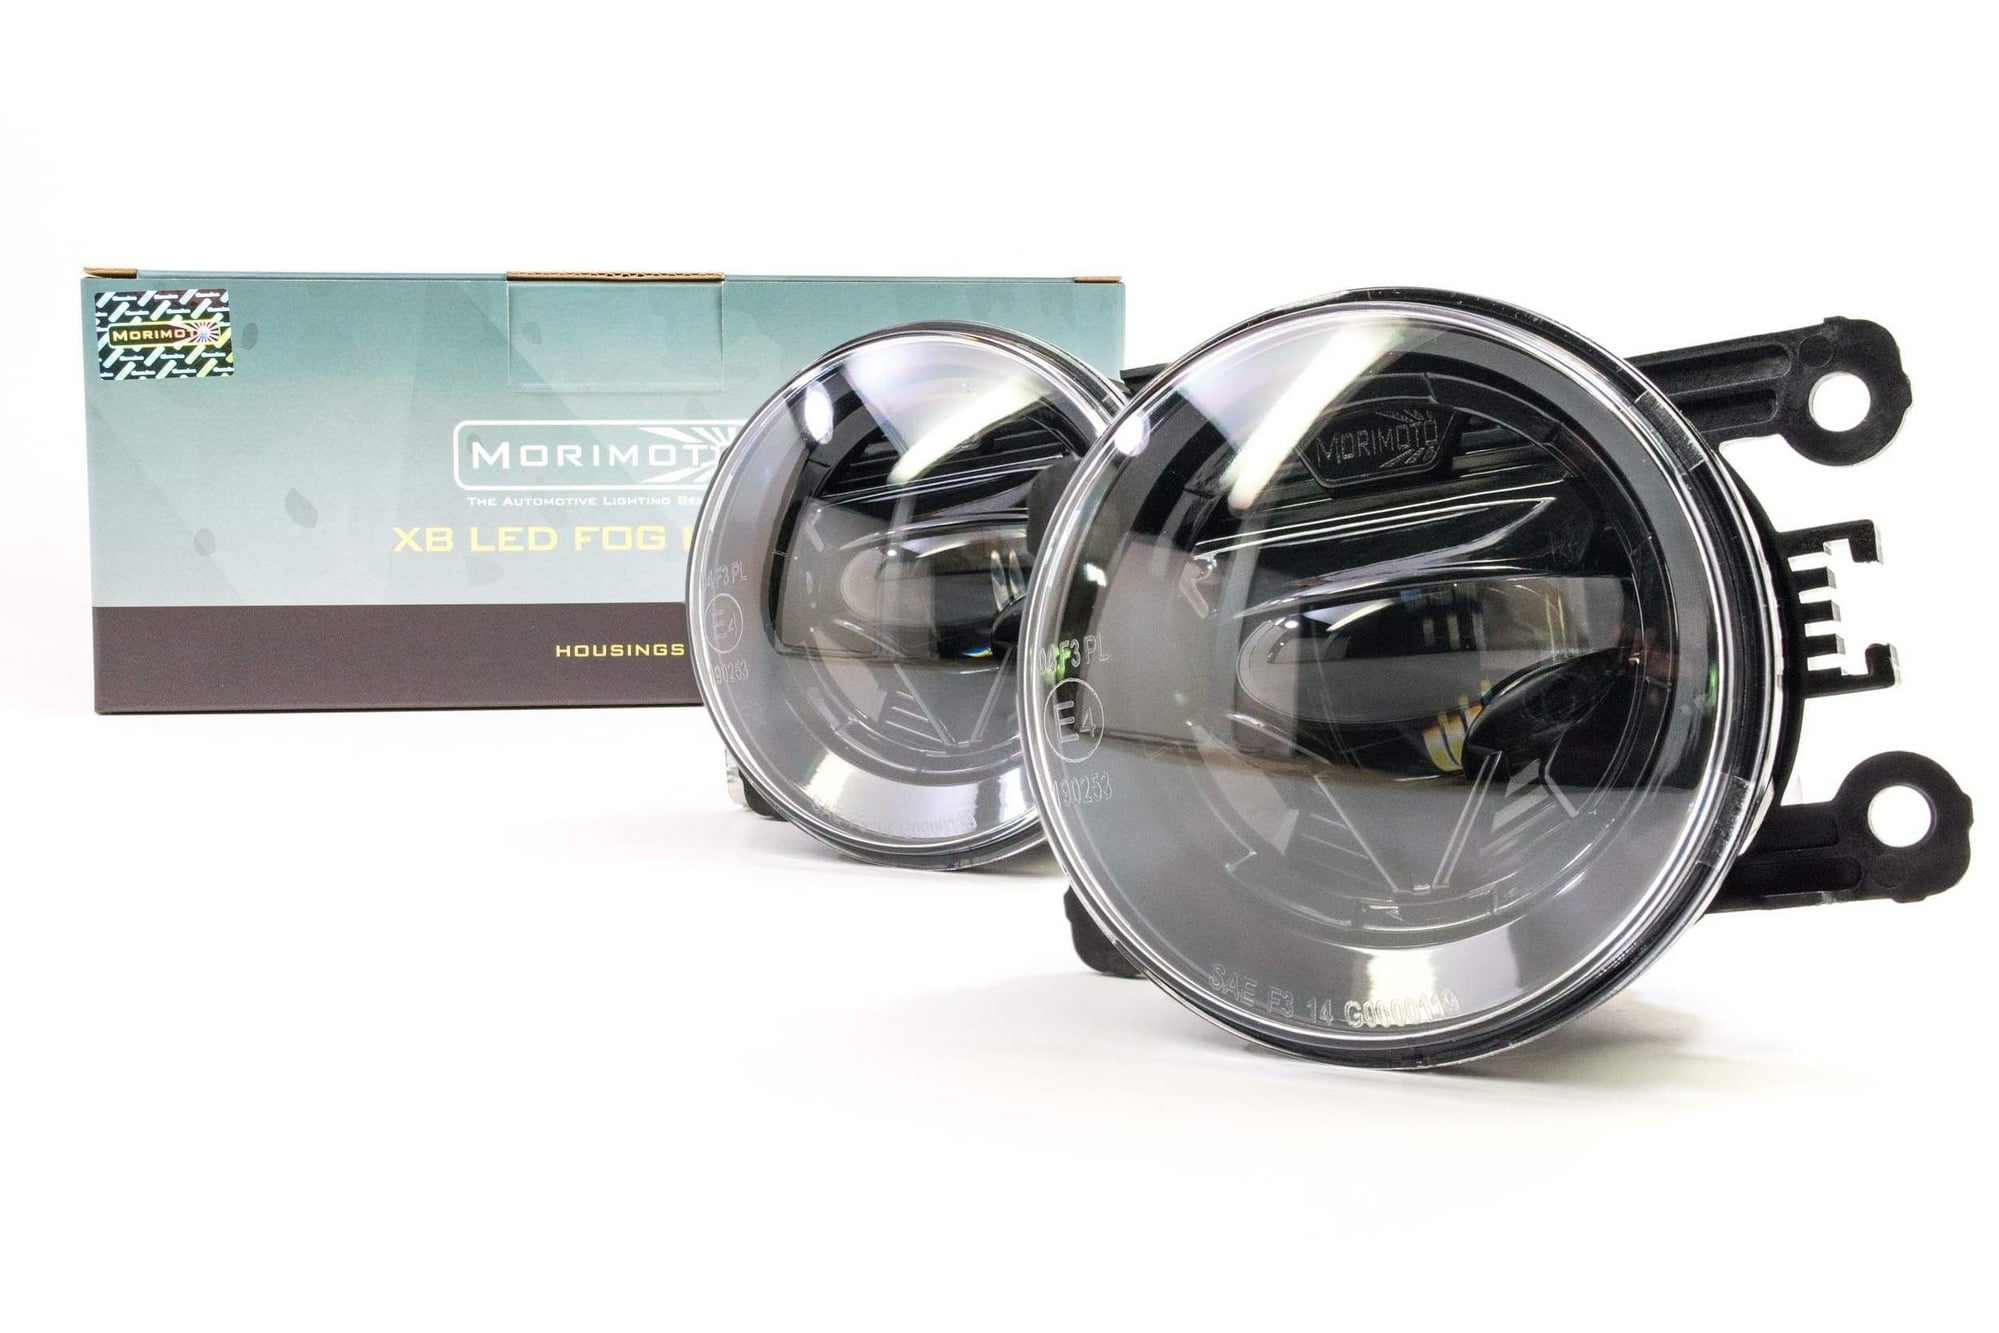 Lights - SOLD: MORIMOTO XB LED Fog Lights - New - 2012 to 2014 Acura TL - 2010 to 2018 Acura All Models - 2012 to 2014 Honda CR-V - 2010 to 2018 Honda All Models - 2010 to 2018 Nissan All Models - 2010 to 2018 Ford All Models - 2010 to 2018 Fiat All Models - 2010 to 2018 Land Rover All Models - Riverdale, NY 10463, United States